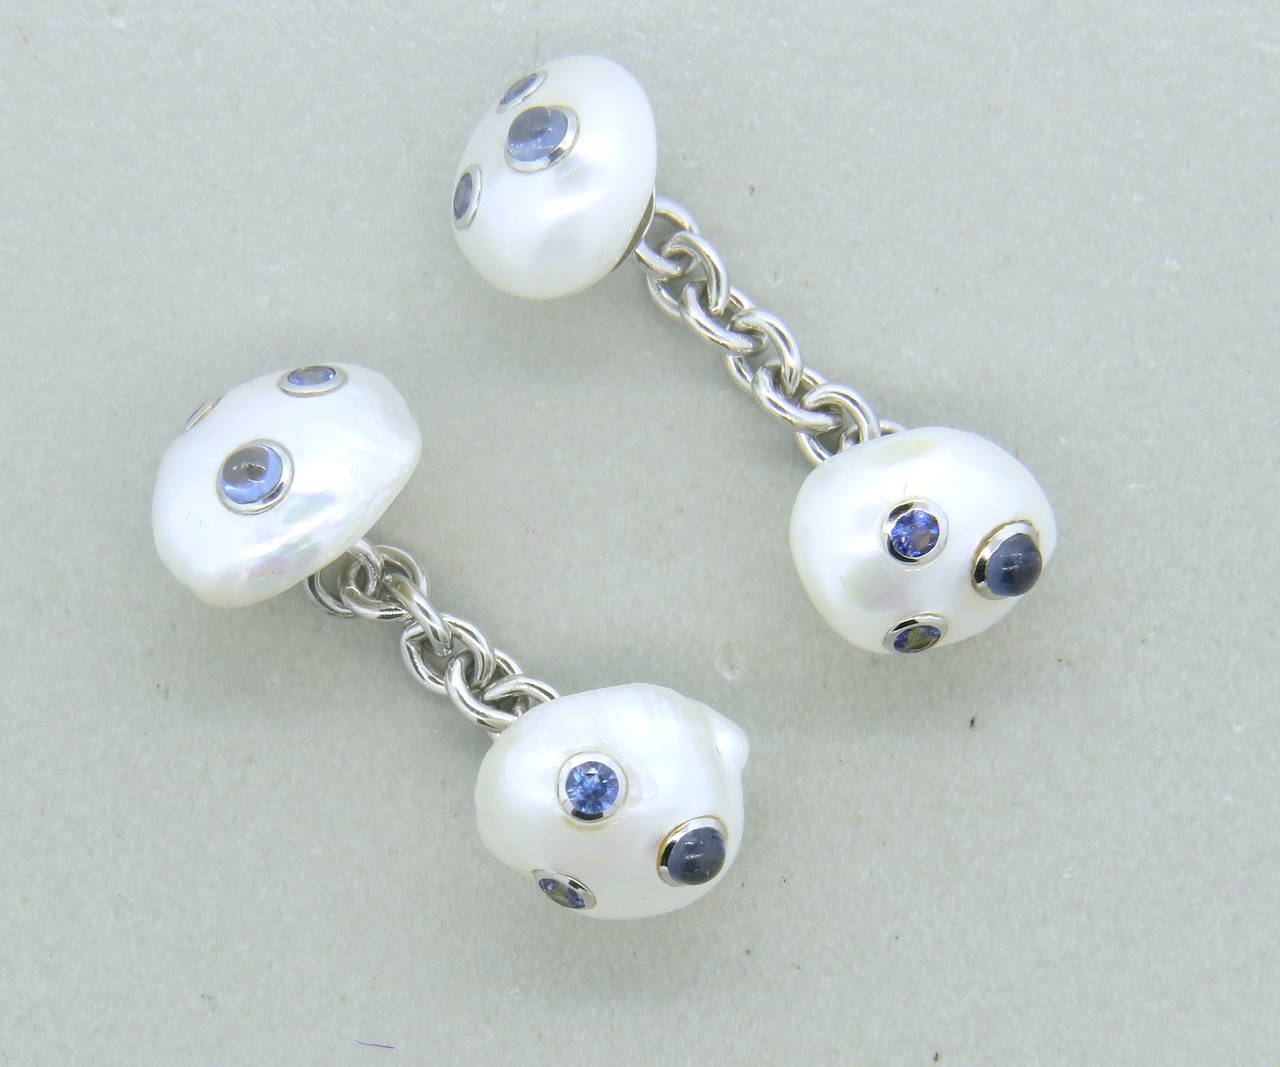 Pair of 18k white gold cufflinks, crafted by Trianon, featuring pearl top and blue sapphires. Tops measure approx. 12mm x 10mm. Marked Trianon and 750. Weight - 7 grams
Retail $4400